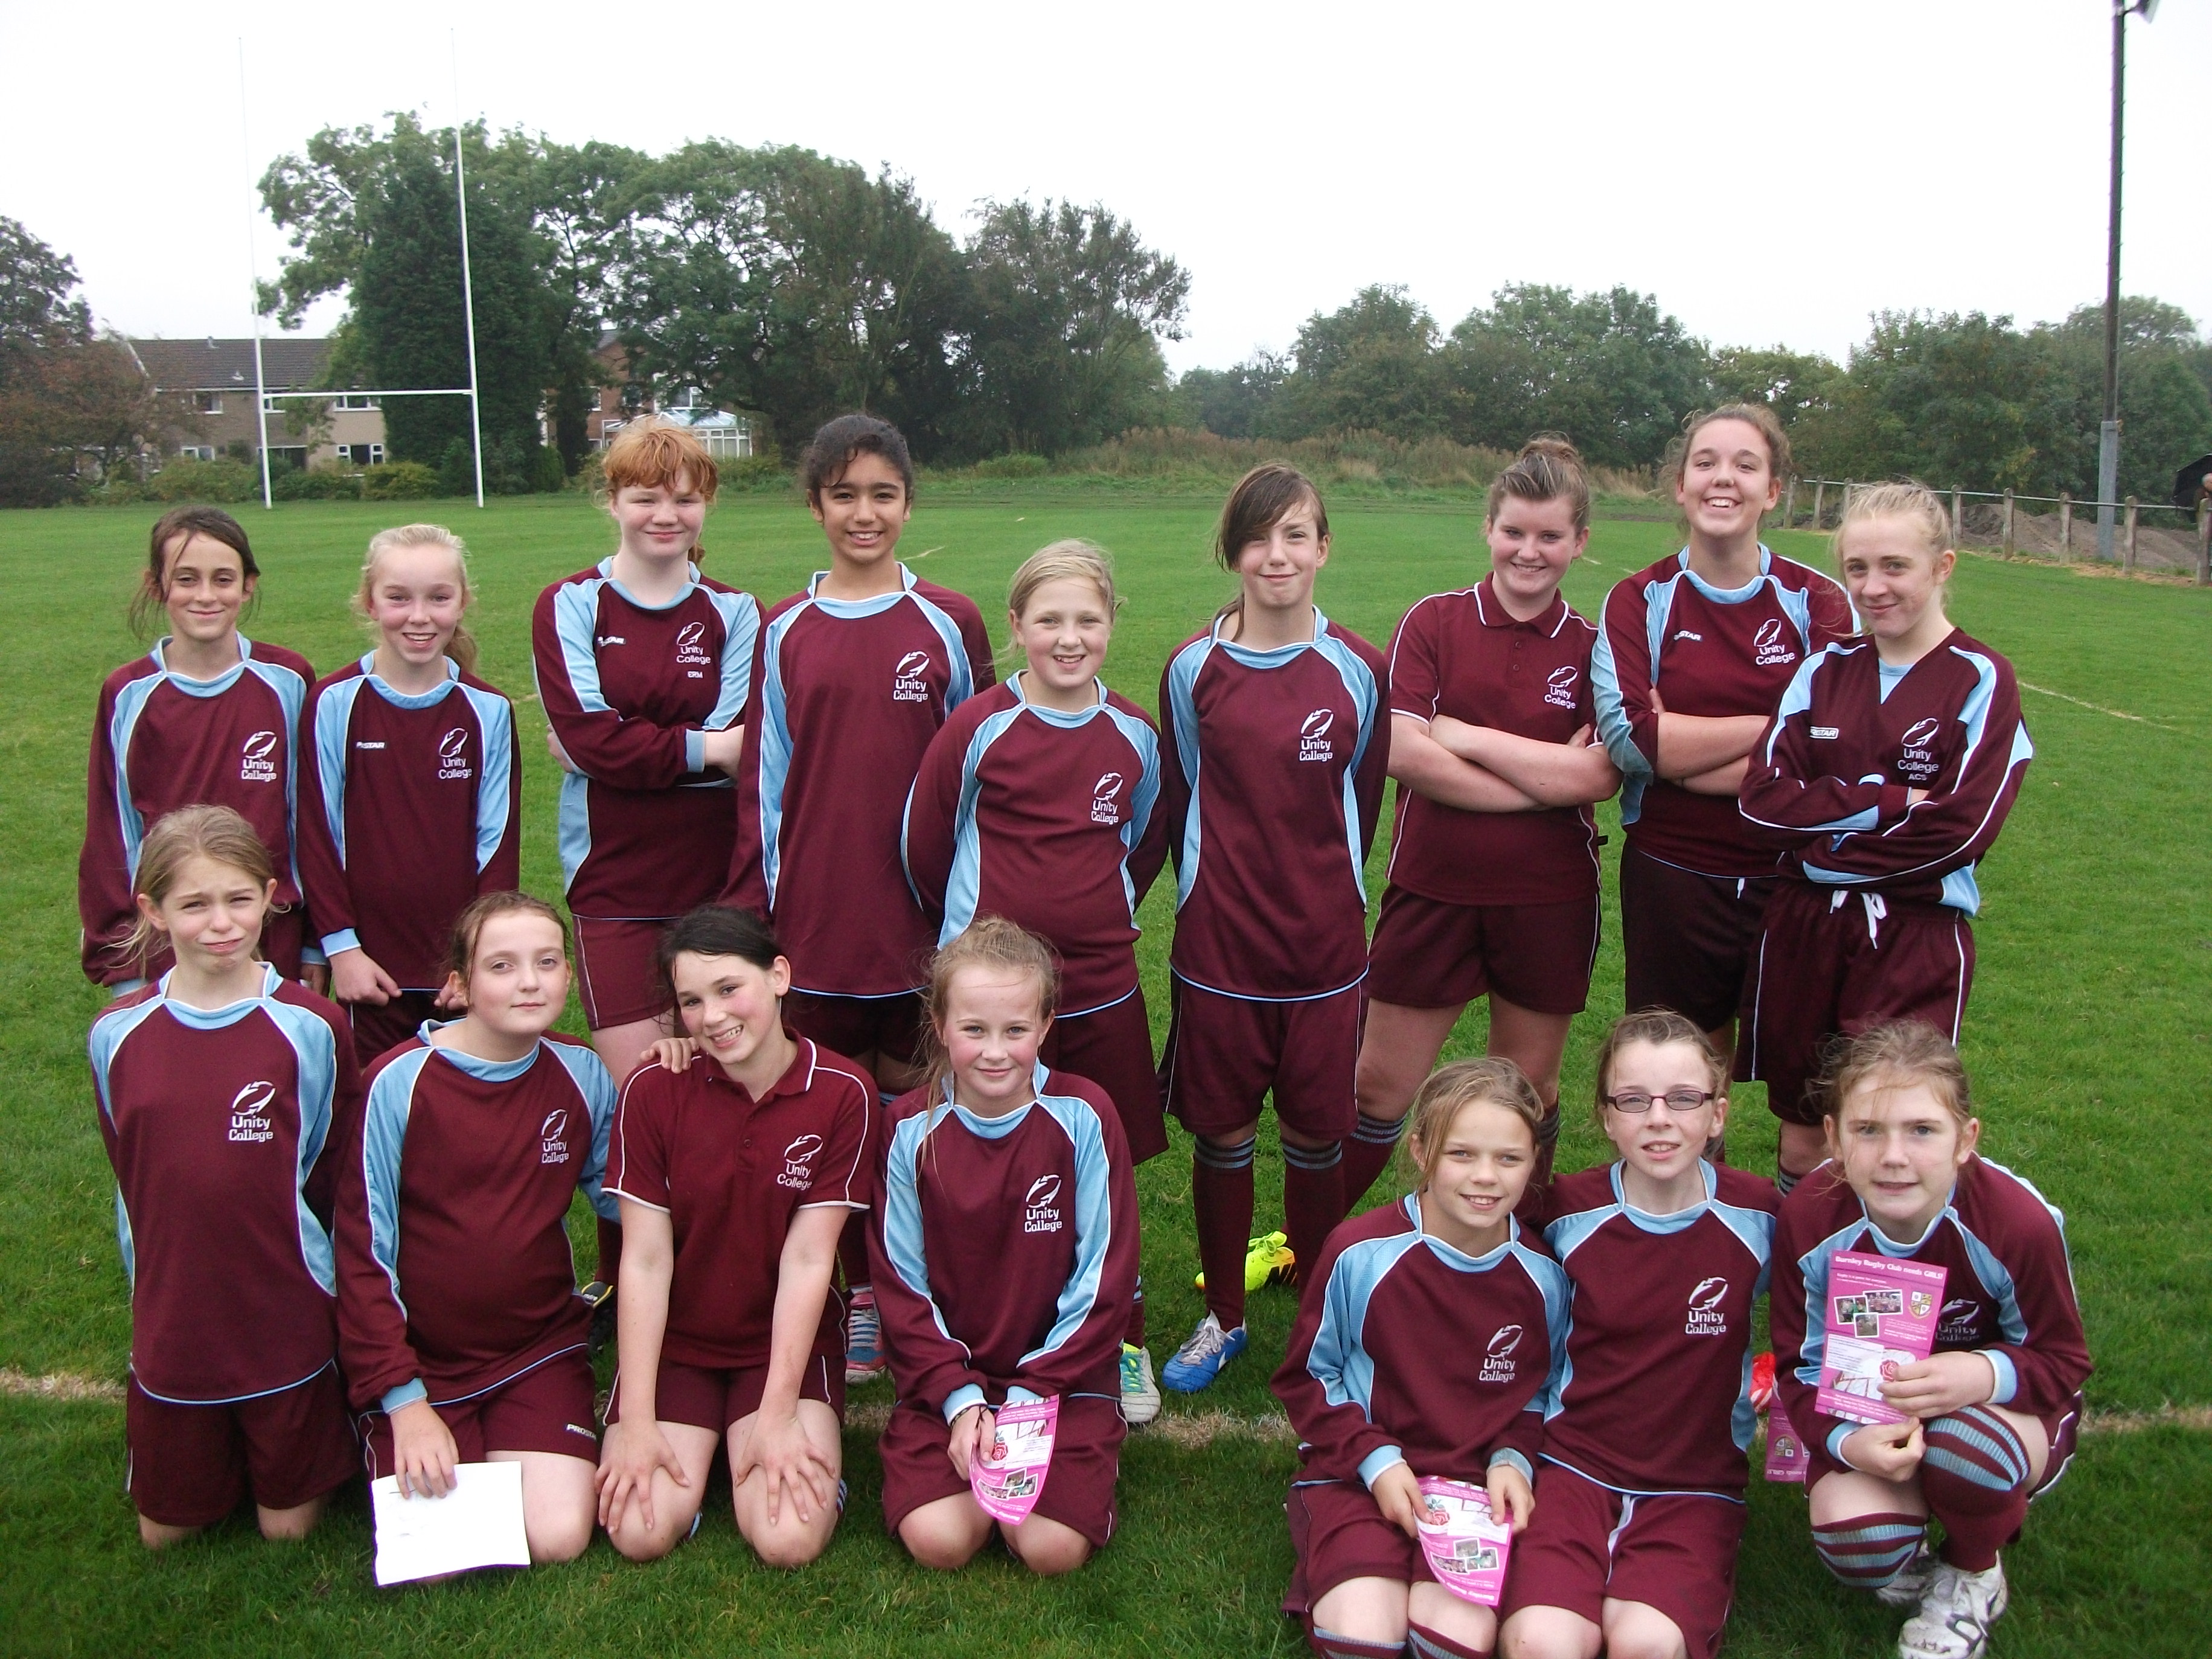 Girls rugby